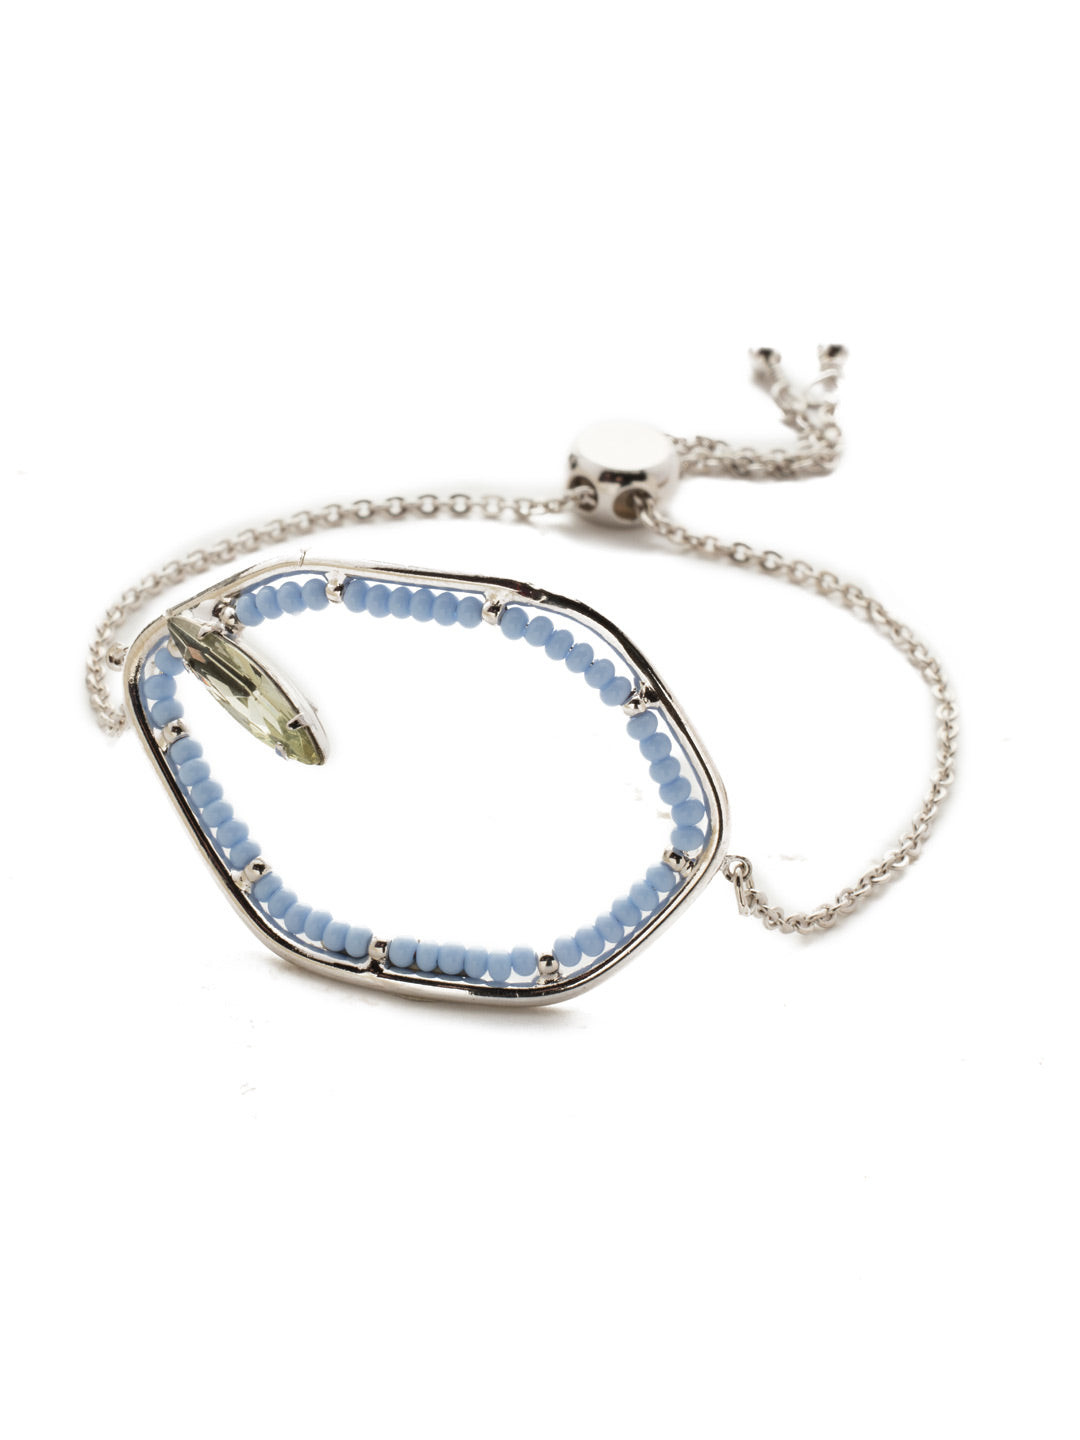 Aphelia Slider Bracelet - BEK16RHSSU - <p>Edgy and fun, the navette crystal says, notice me. The beading adds a bit of whimsy, too. Slider bracelet closure. From Sorrelli's Seersucker collection in our Palladium Silver-tone finish.</p>